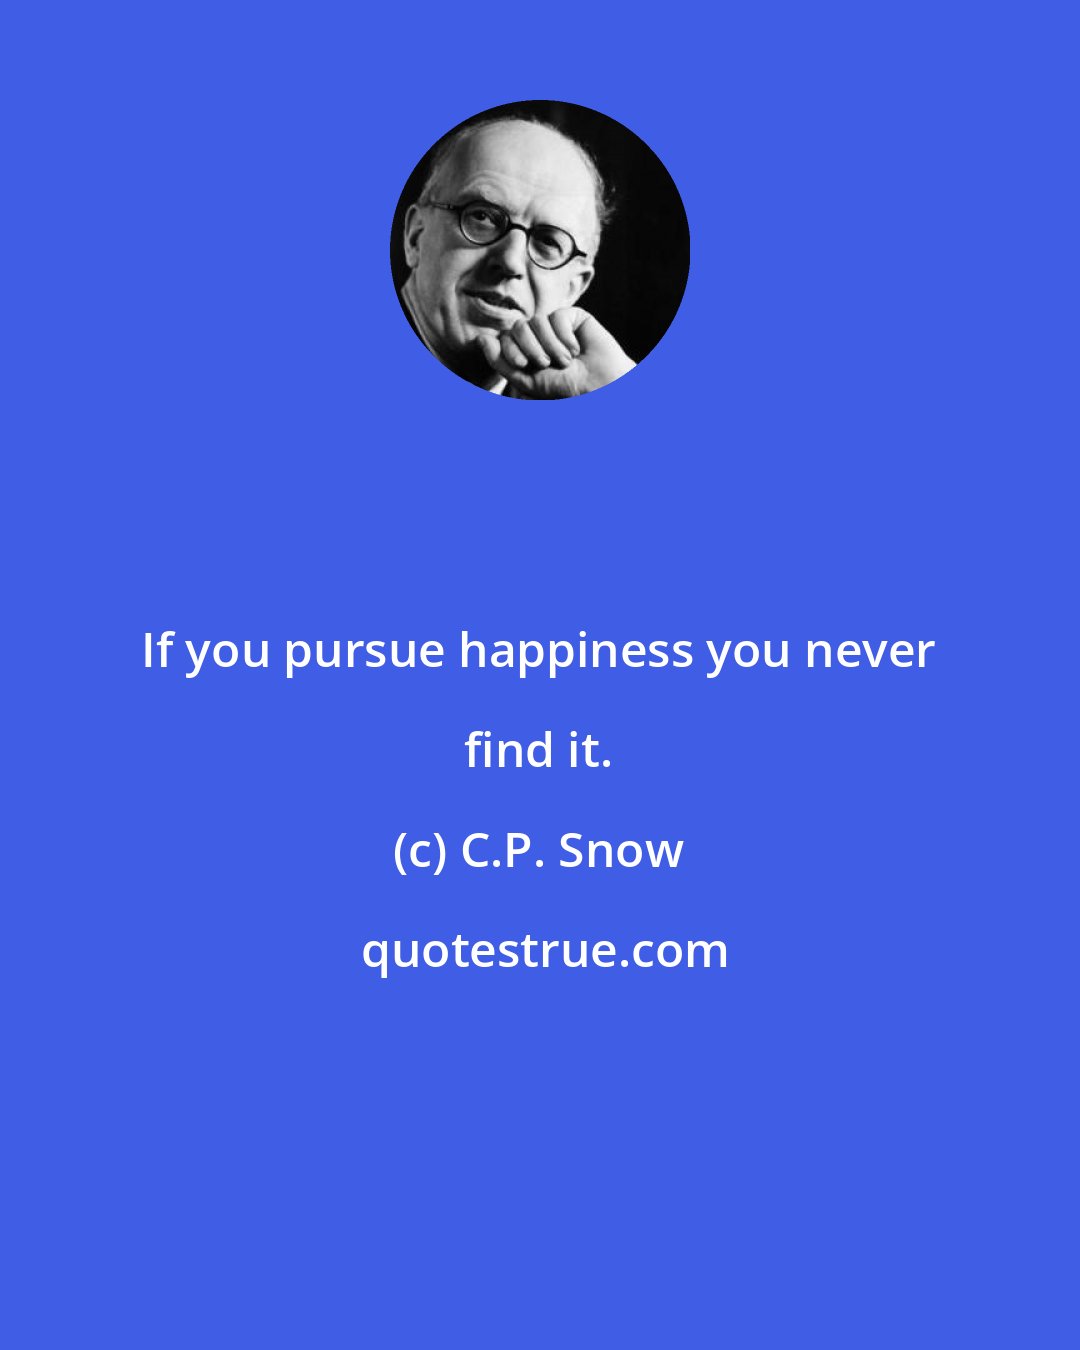 C.P. Snow: If you pursue happiness you never find it.